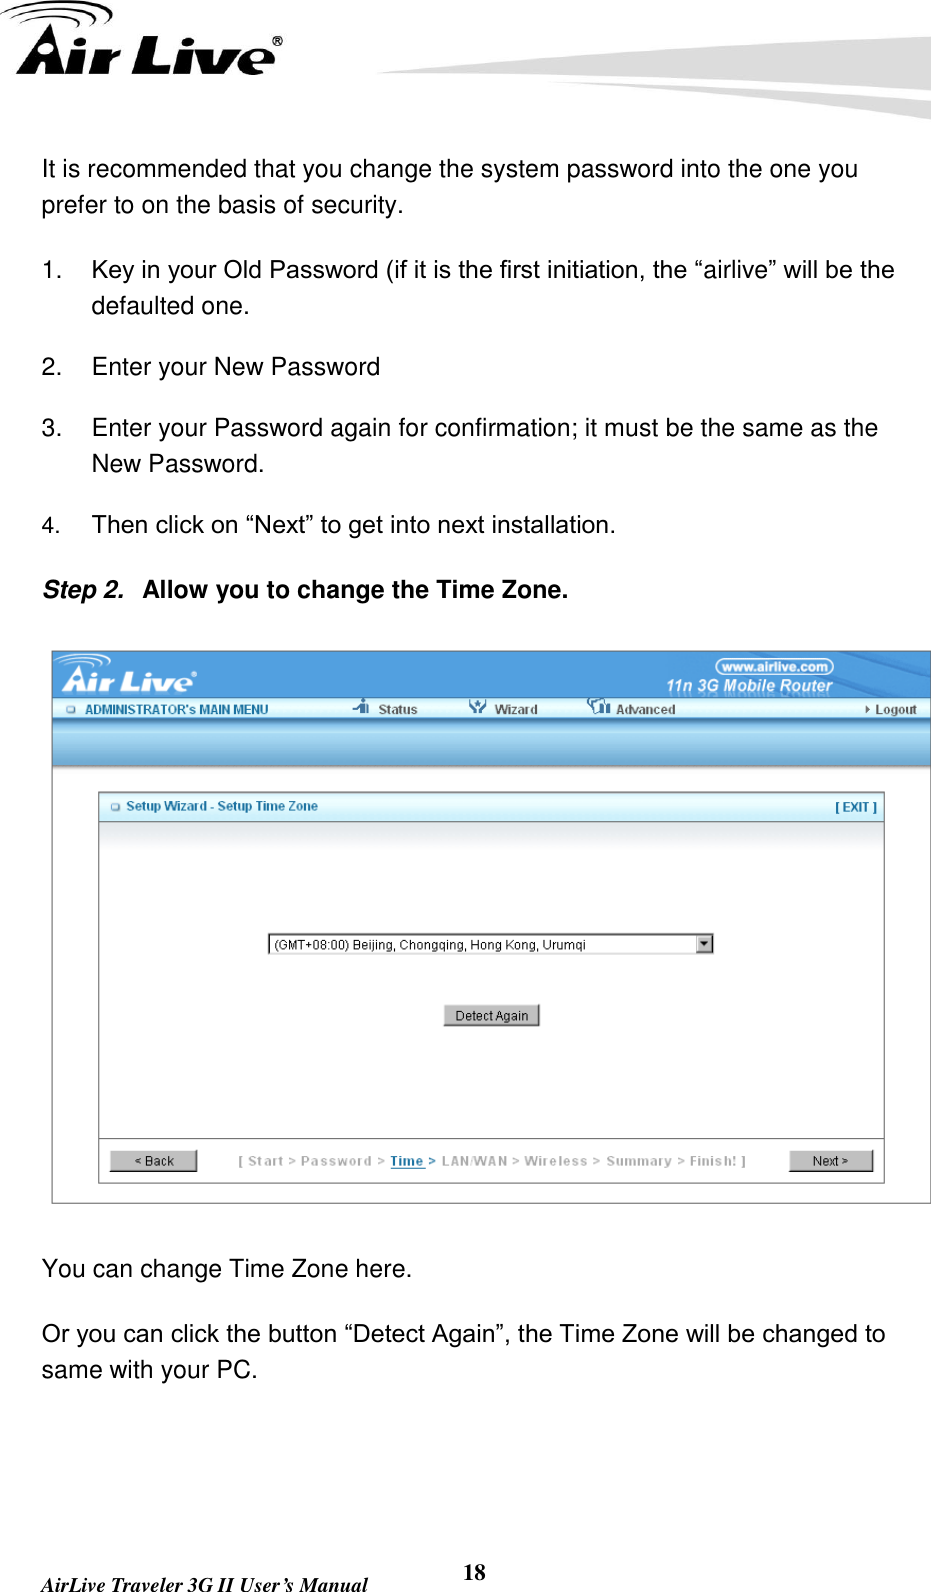   AirLive Traveler 3G II User’s Manual 18 It is recommended that you change the system password into the one you prefer to on the basis of security.   1. Key in your Old Password (if it is the first initiation, the “airlive” will be the defaulted one. 2.  Enter your New Password 3.  Enter your Password again for confirmation; it must be the same as the New Password. 4. Then click on “Next” to get into next installation. Step 2.  Allow you to change the Time Zone.  You can change Time Zone here. Or you can click the button “Detect Again”, the Time Zone will be changed to same with your PC.   